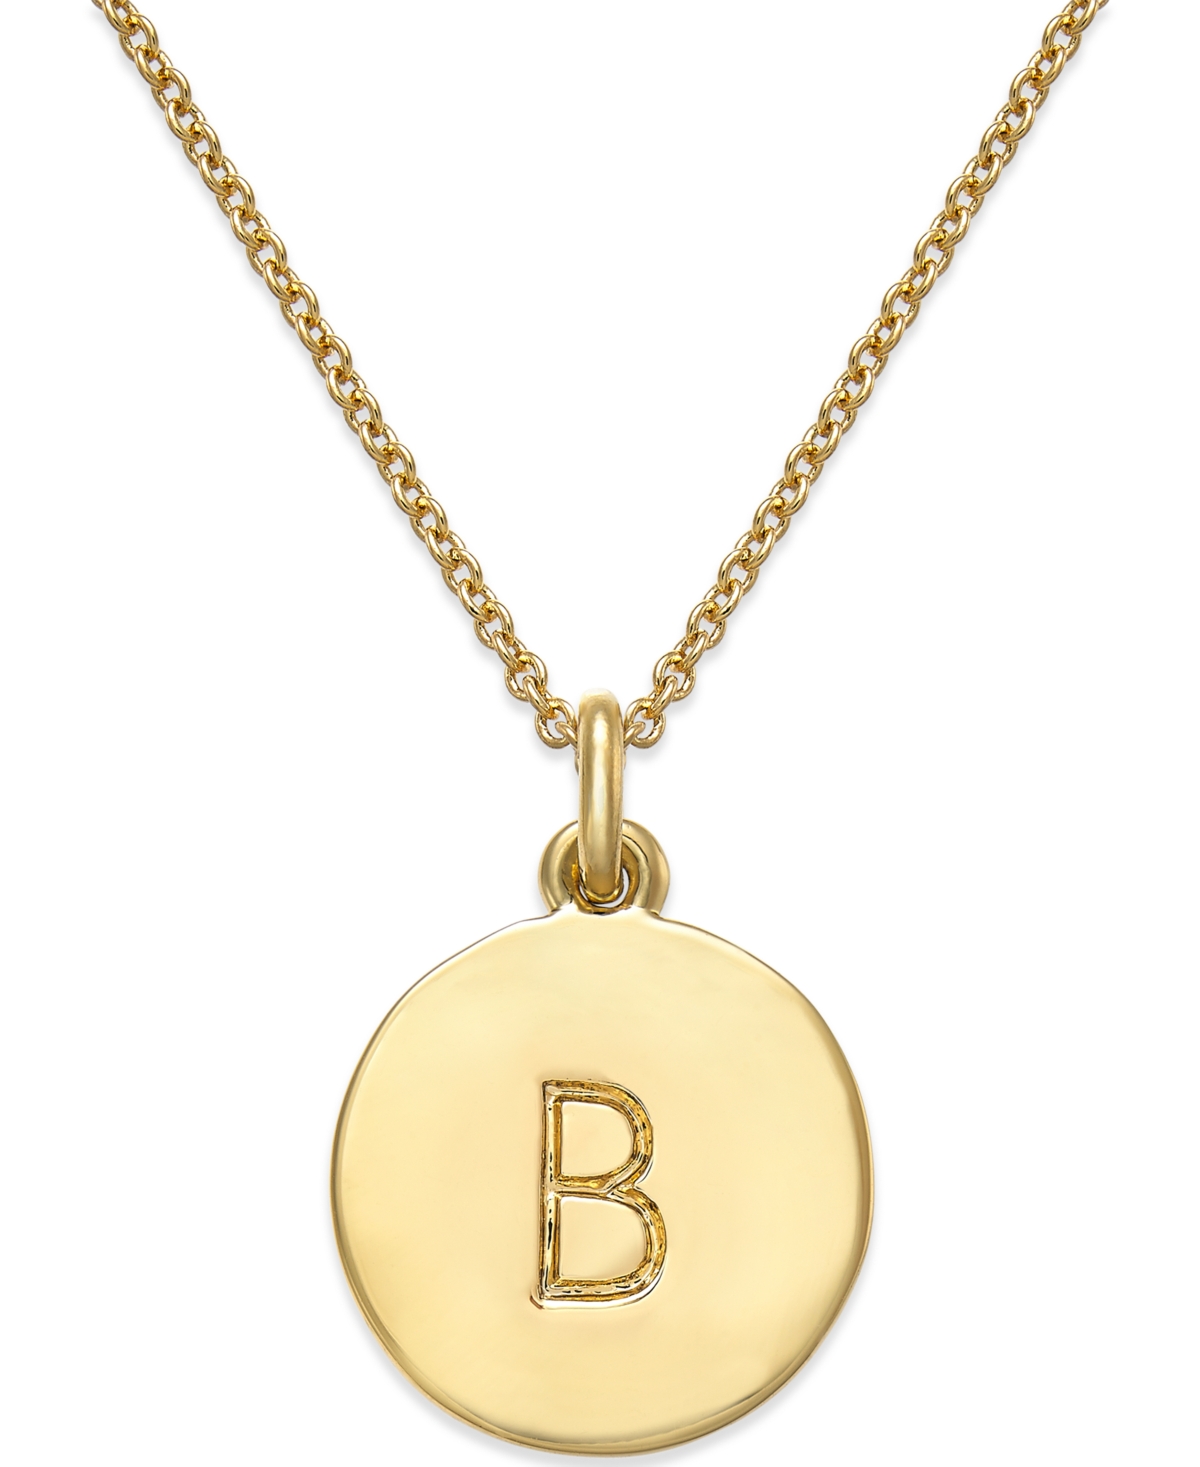 12k Gold-Plated Initials Pendant Necklace, 17" + 3" Extender - T